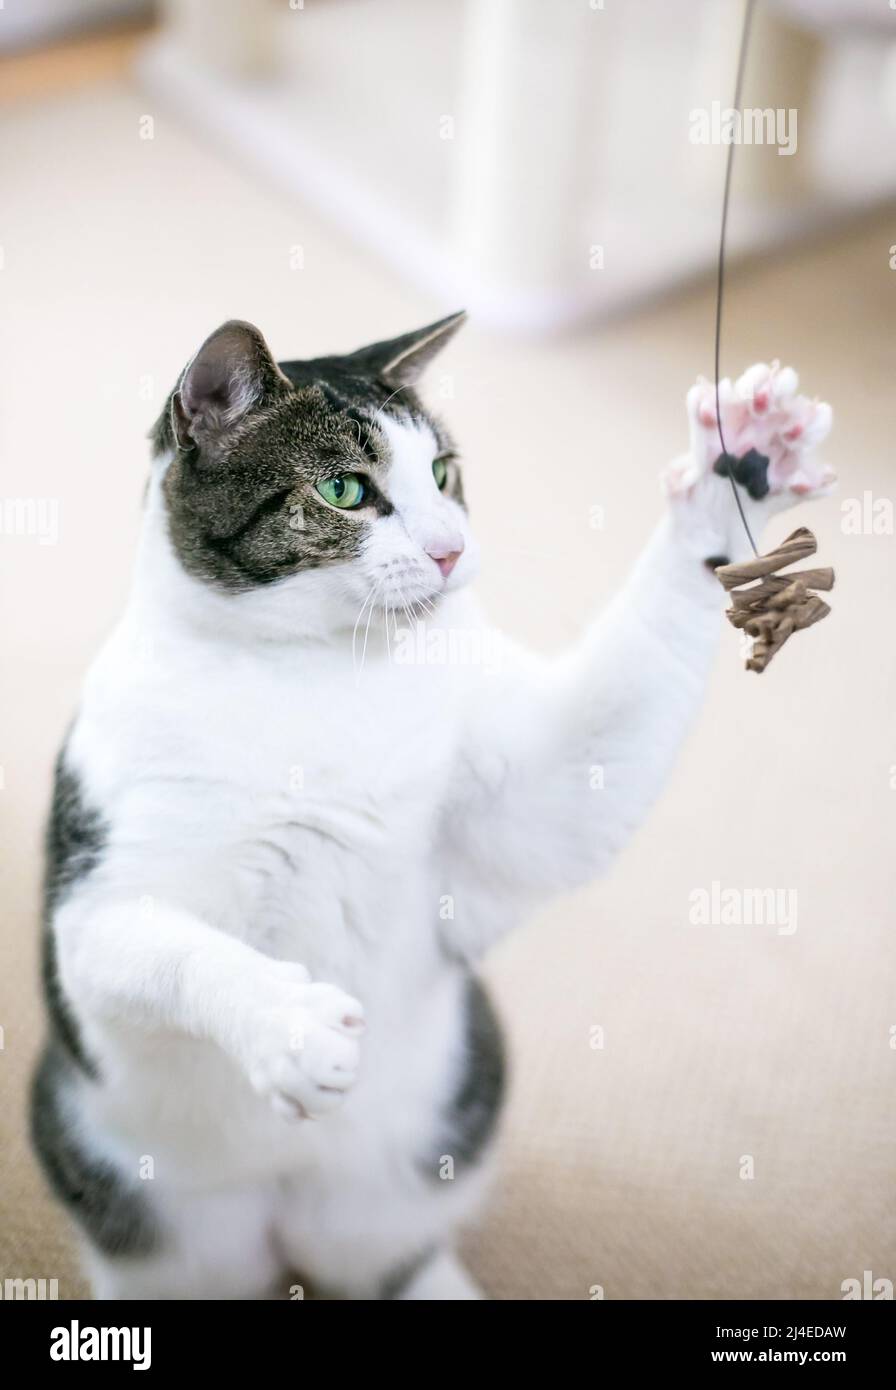 A tabby and white shorthair cat with green eyes playing with a toy Stock Photo